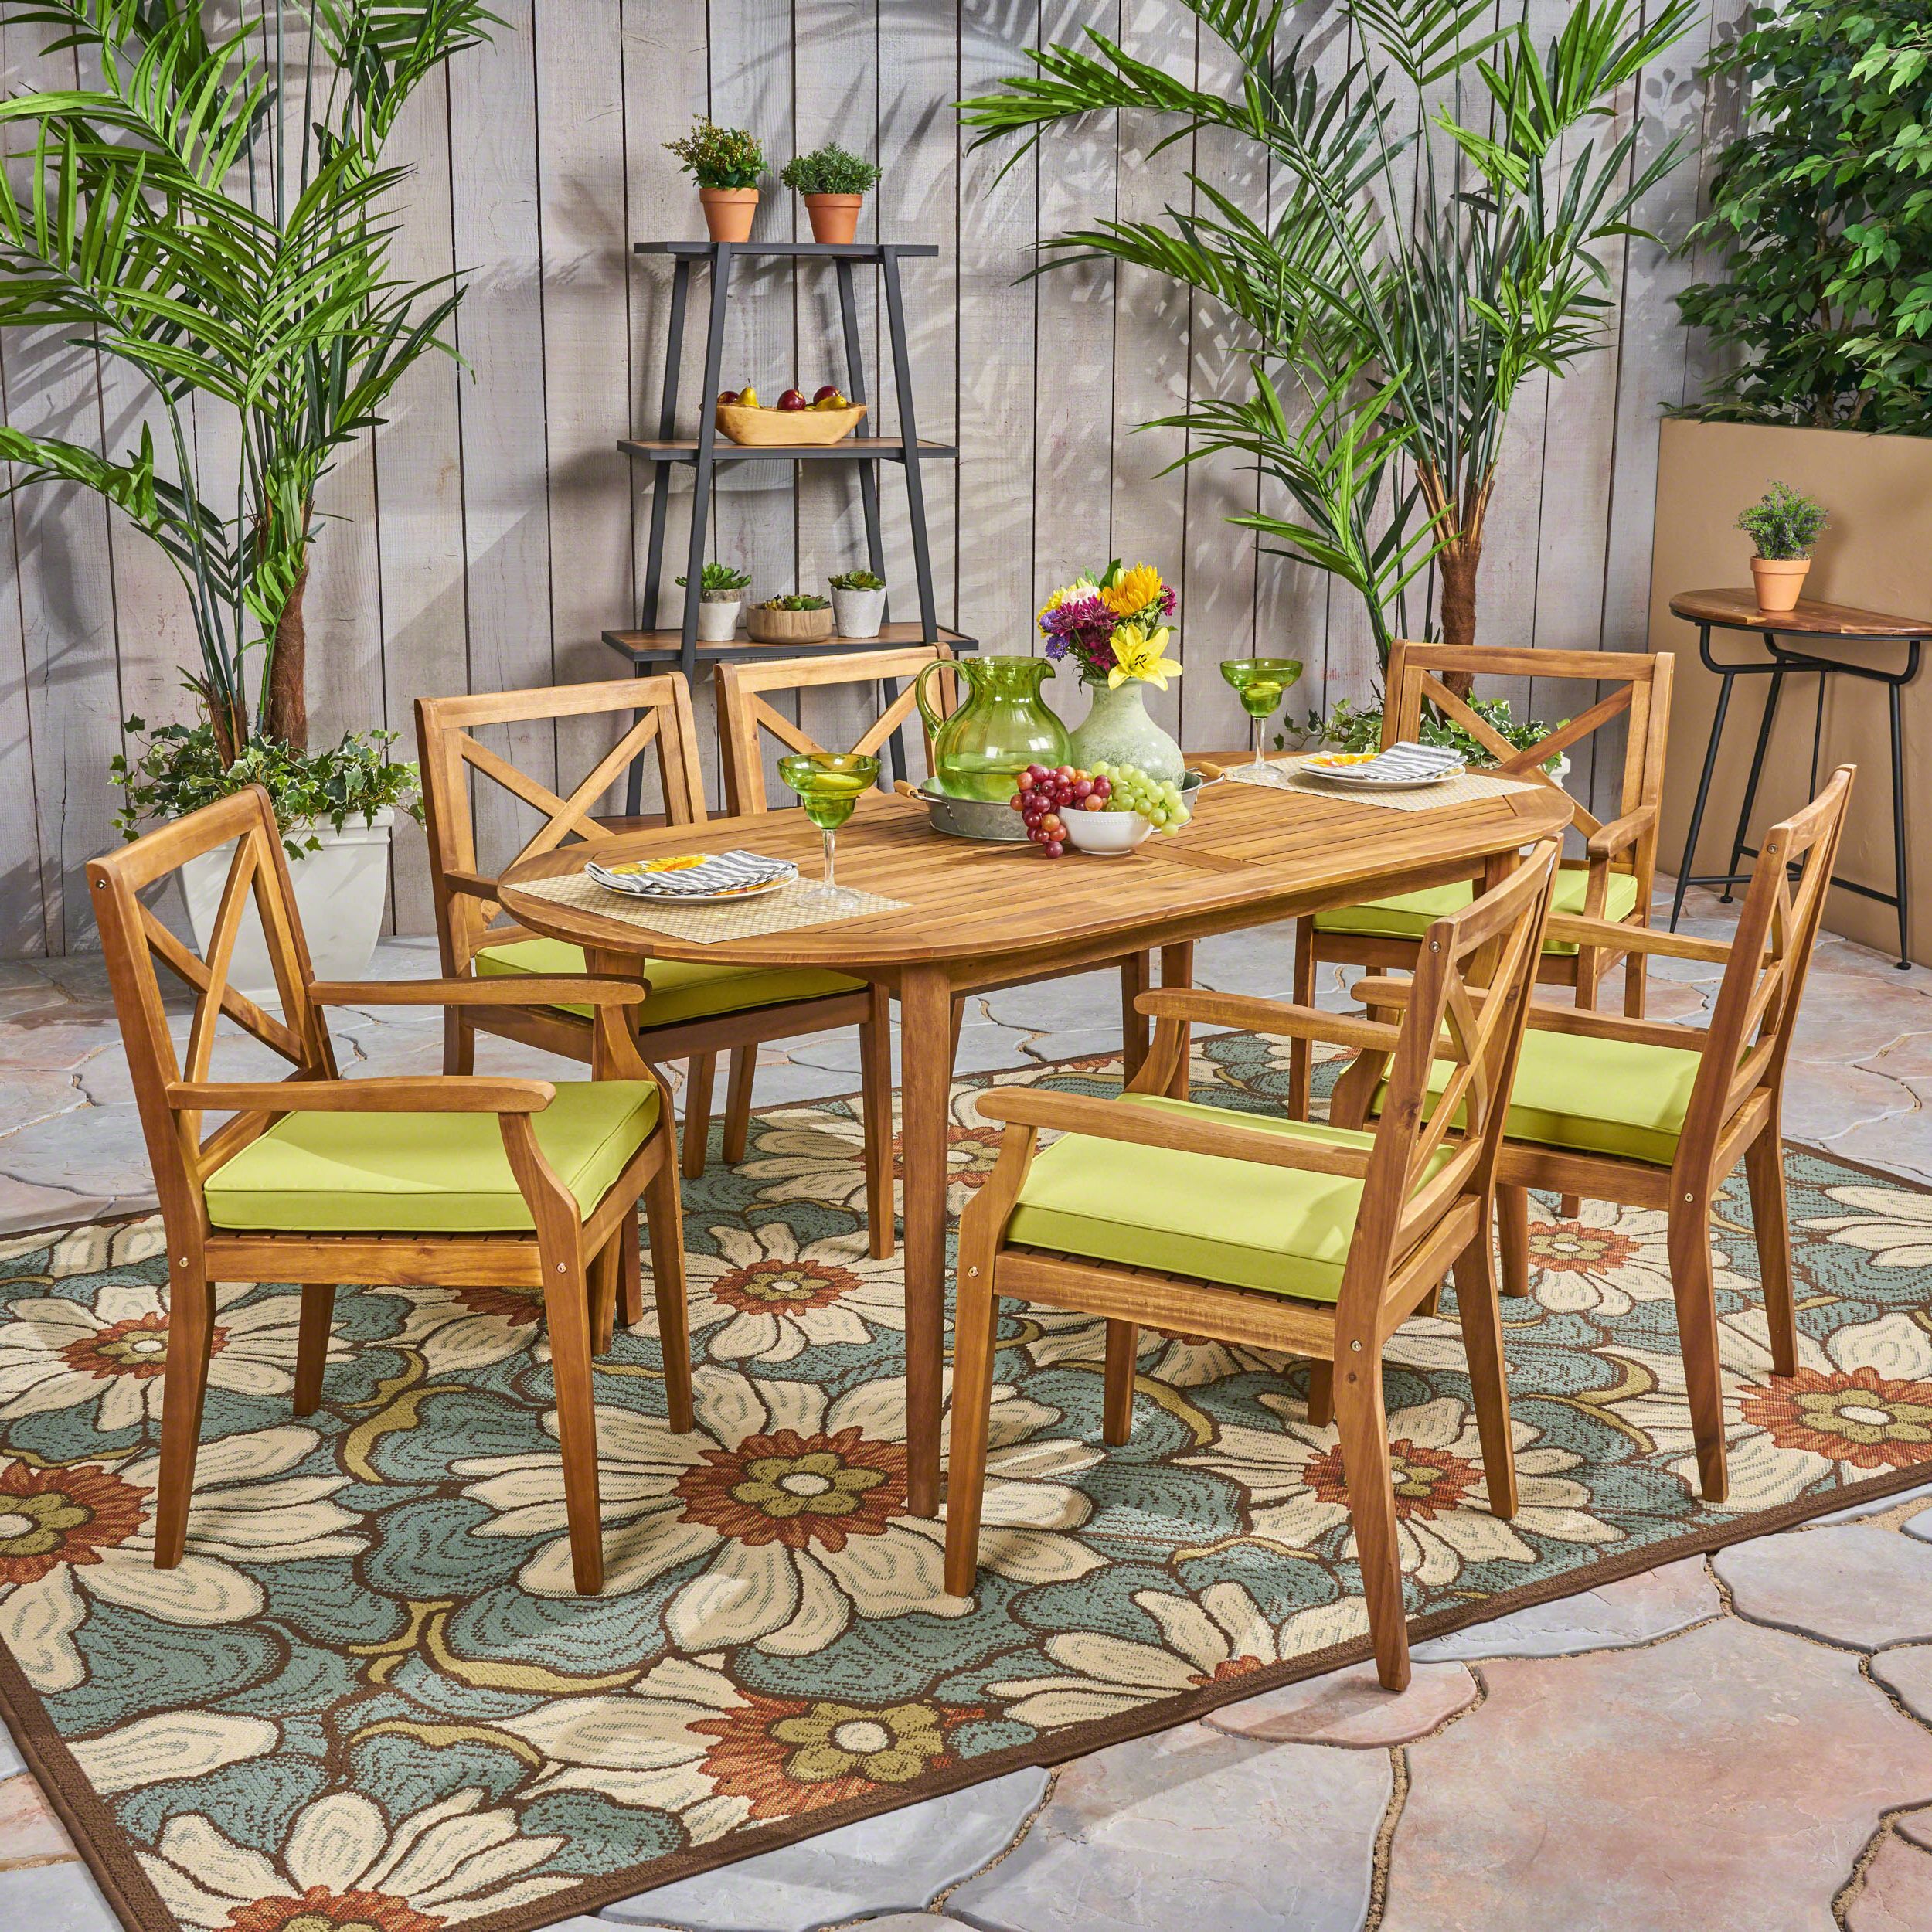 Acacia Wood Outdoor Seating Patio Sets Regarding Popular Oakley Outdoor 7 Piece Acacia Wood Dining Set With Cushions, Teak (View 4 of 15)